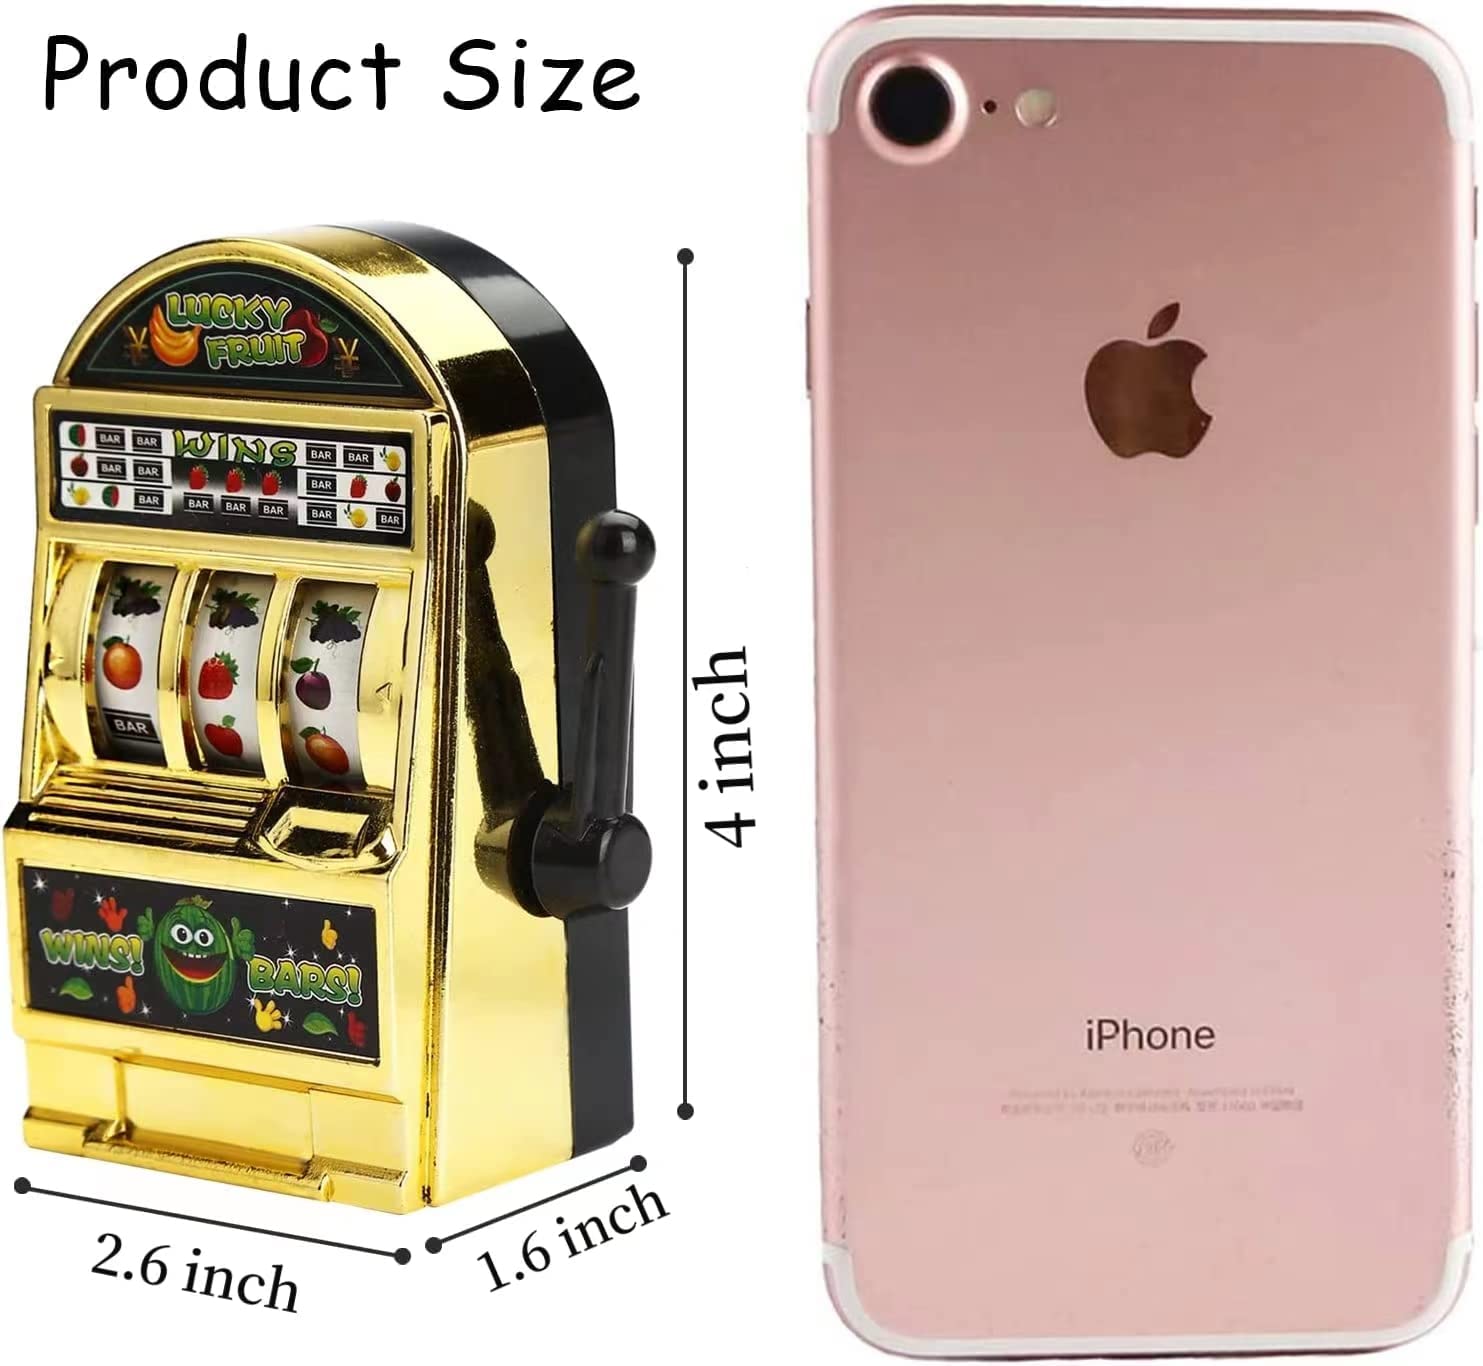 A gold colored mini slot machine toy next to a pink iphone showing the product size. The mini shot machine is 4 inches in height, 2.6 inches wide and 1.6 inches in depth., 